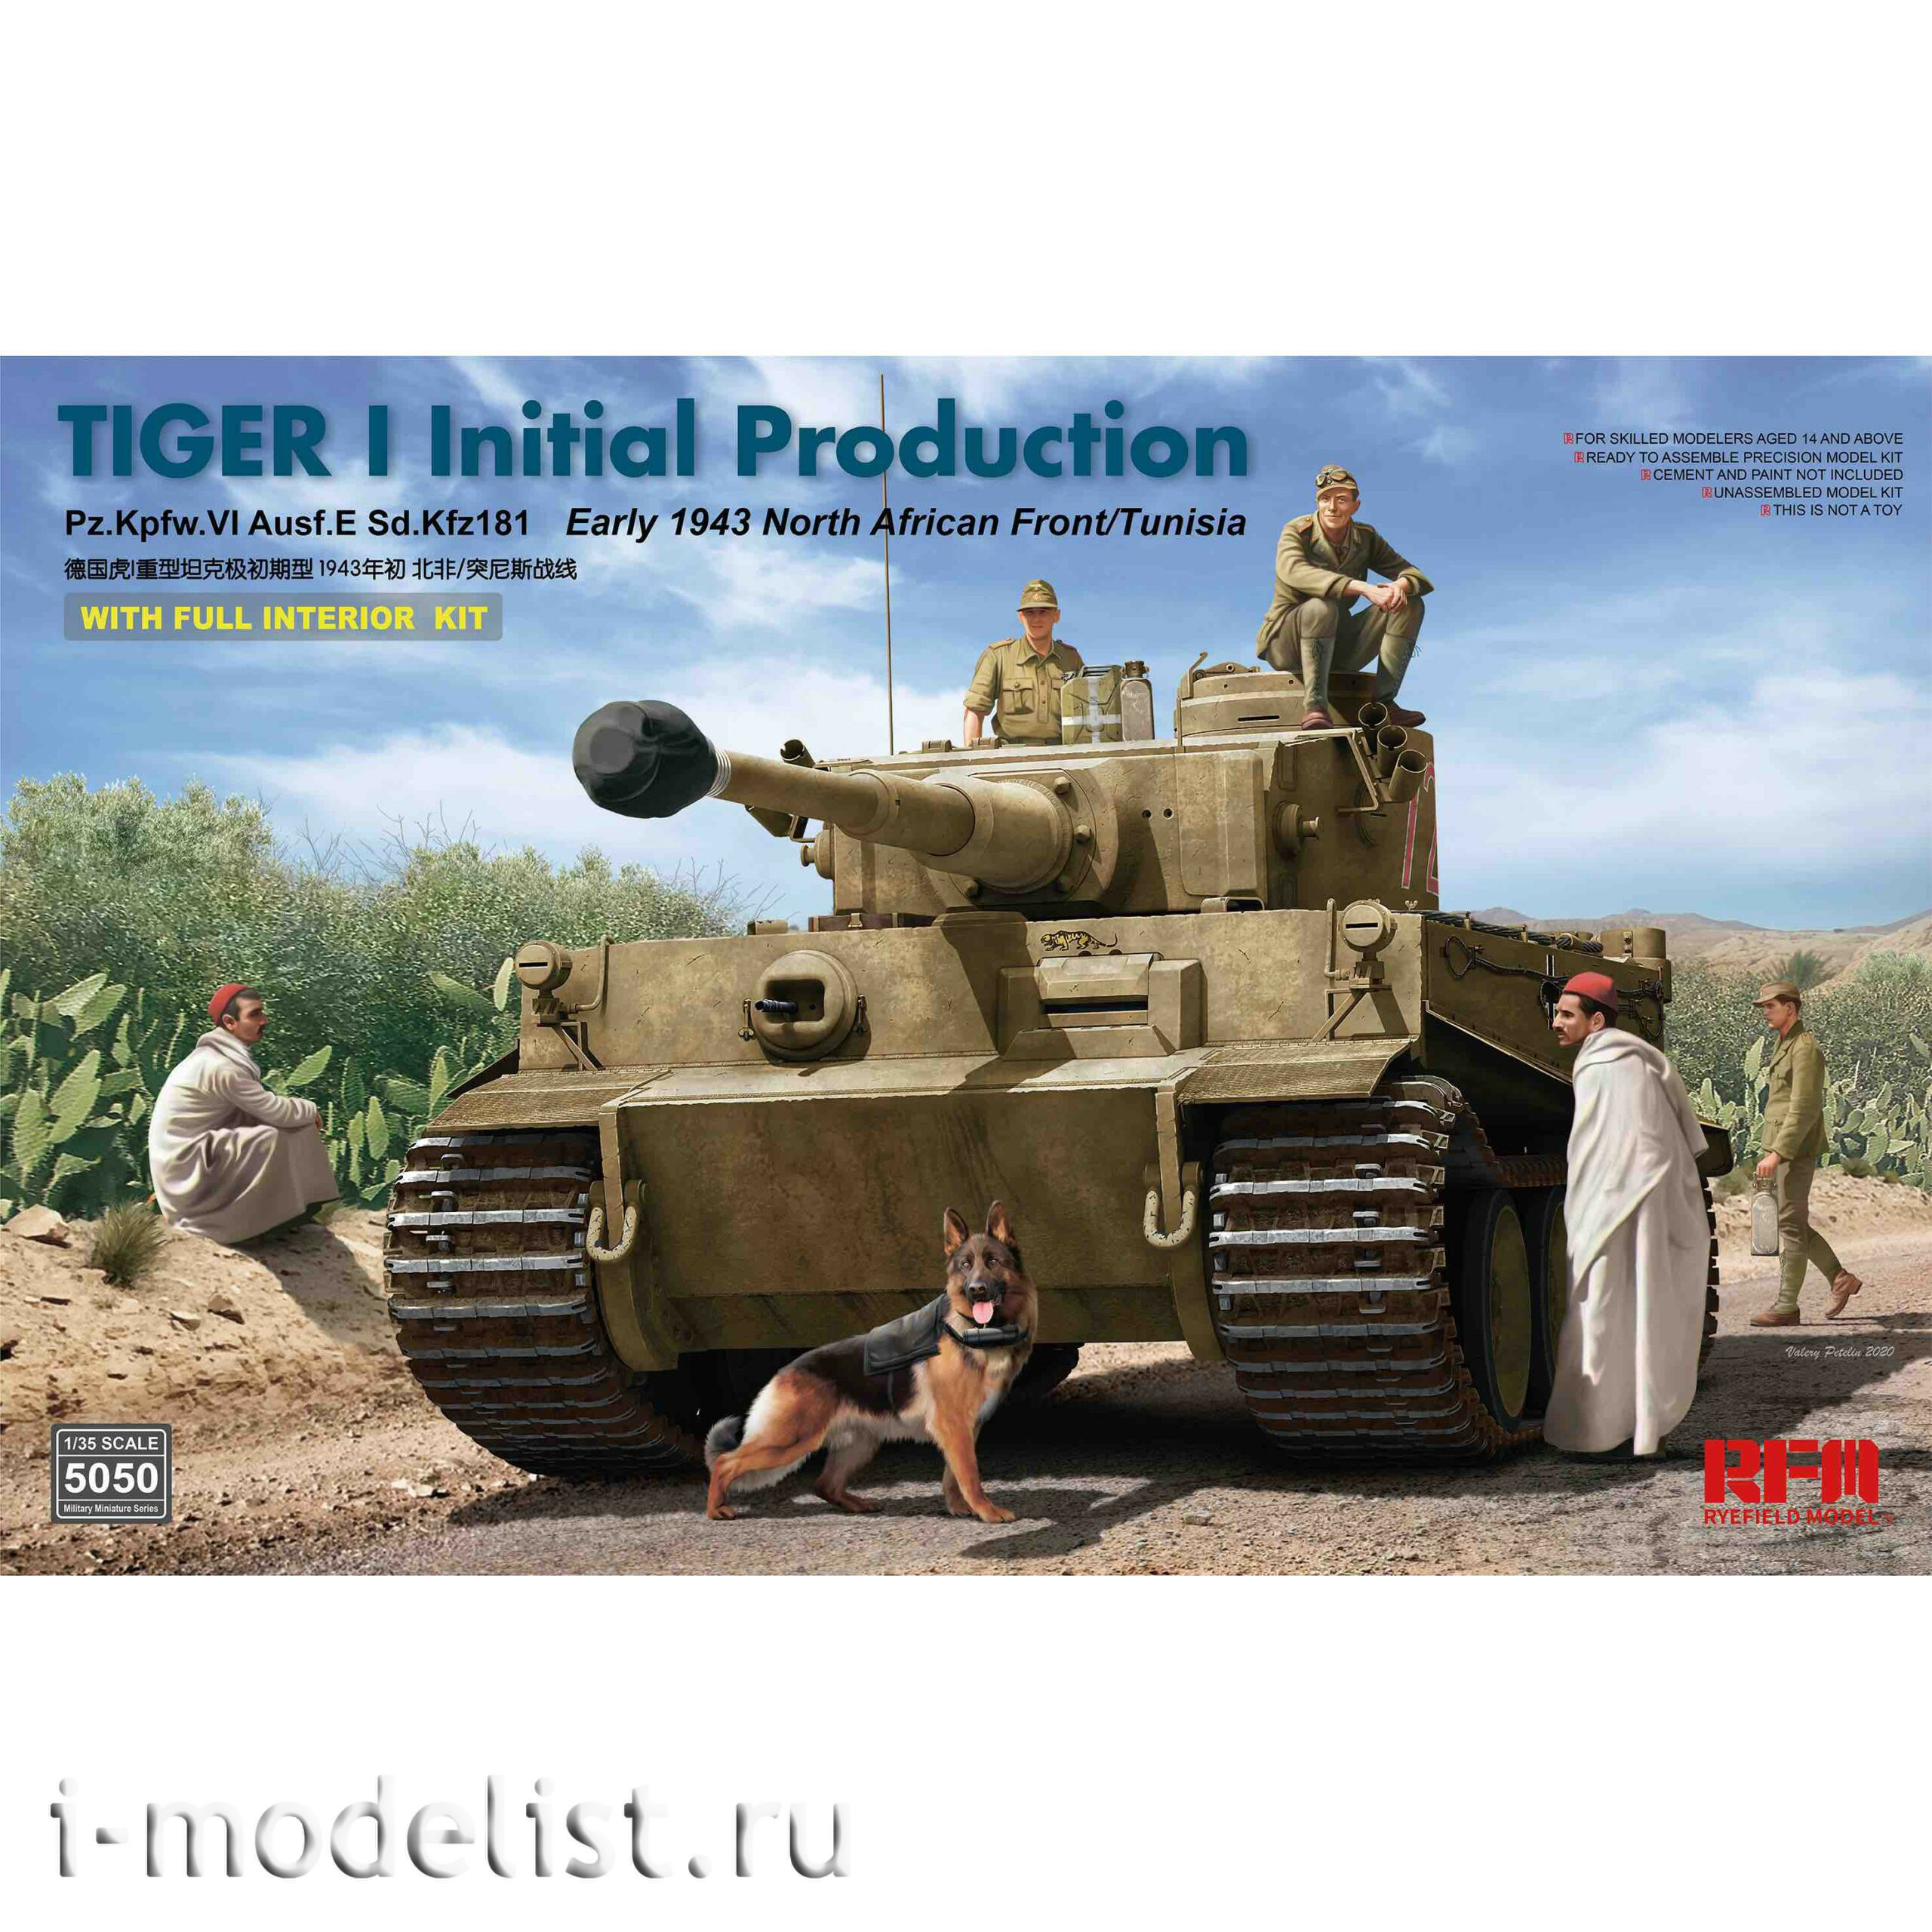 RM-5050 Rye Field Model 1/35 Tank Tiger I Initial Production (Early 1943 North African Front/Tunisia) with Full Interior